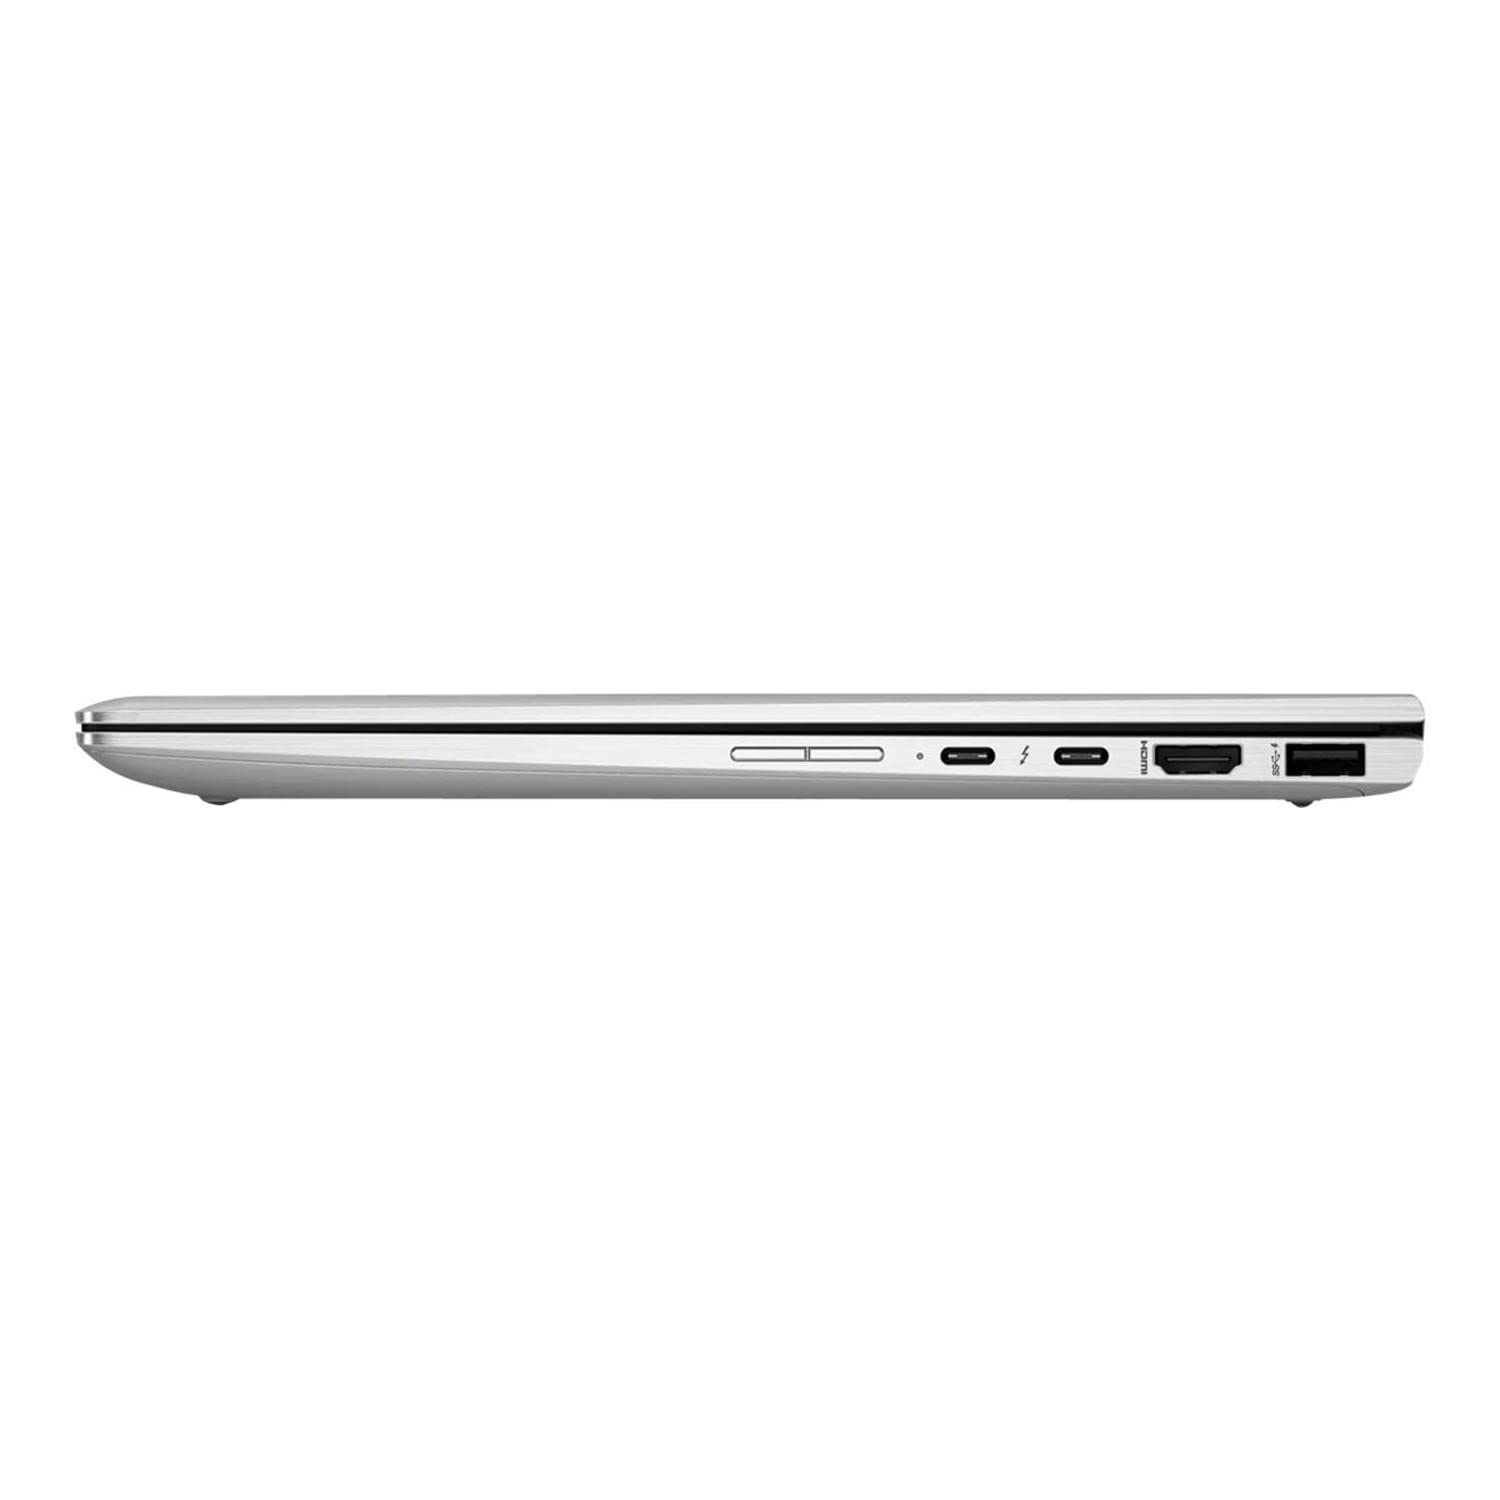 HP EliteBook x360 1040 G5 14" FHD Convertible Touch Laptop with HP Sure View Privacy Screen - i7 8650U, 16GB RAM, 2TB SSD, Fingerprint Reader, WIFI 5 & BT4.2, Free upgrade to Windows 11 Pro (Renewed)